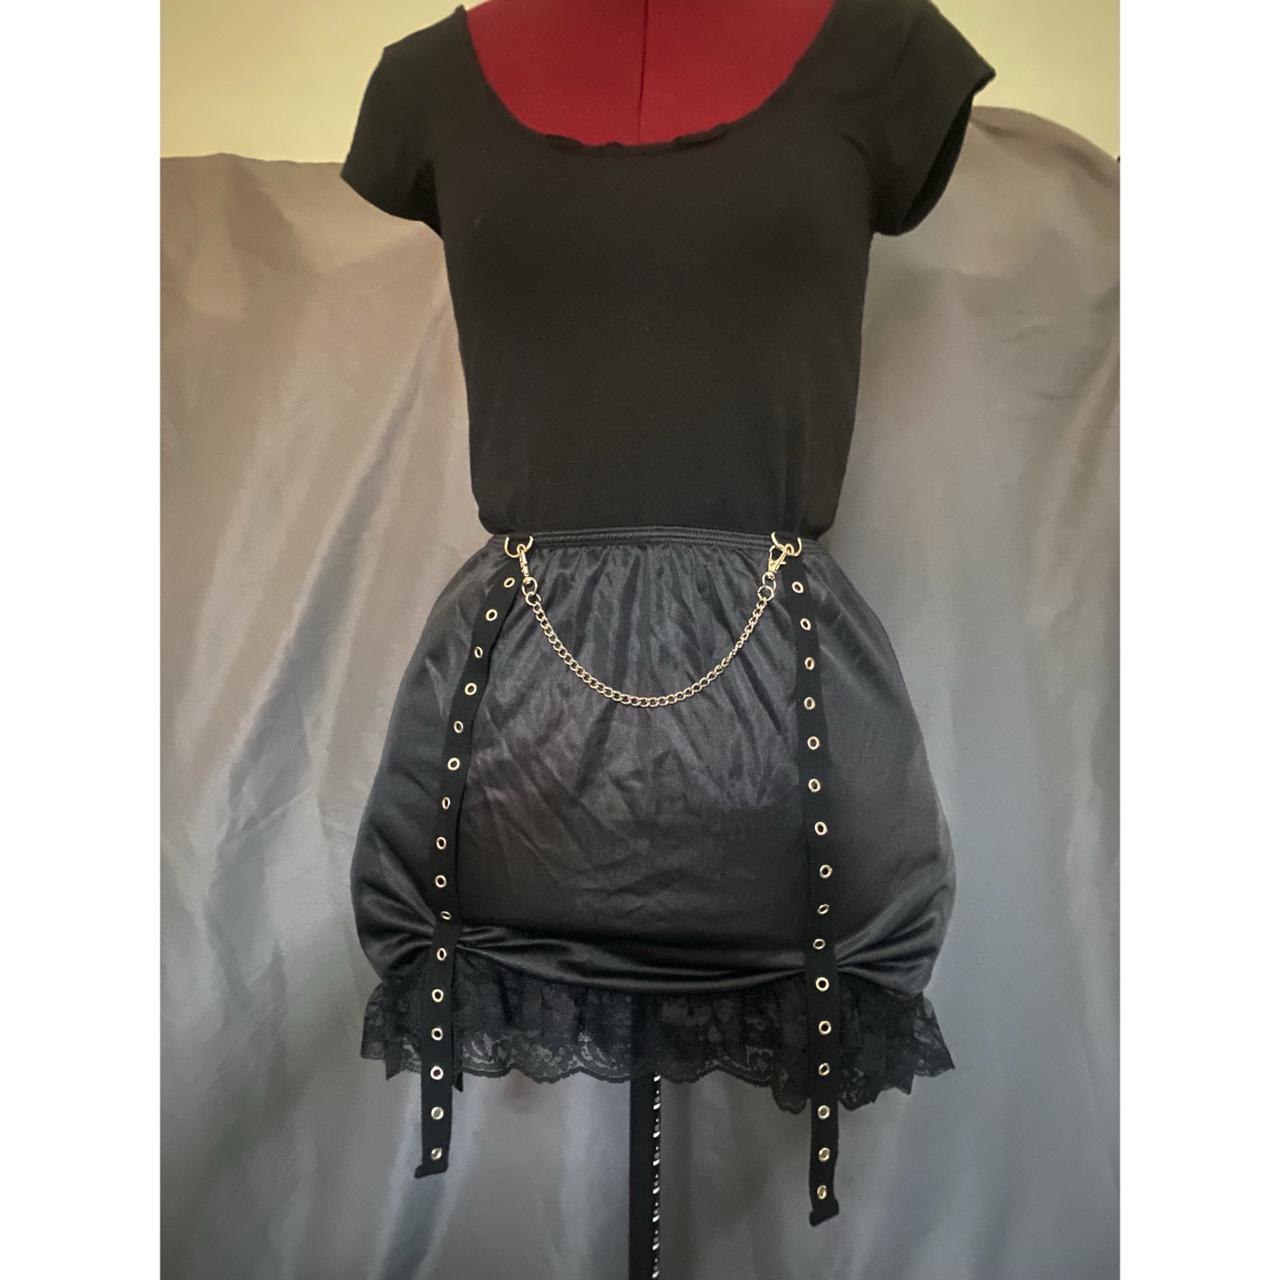 Product Image 3 - Chain Grommet Skirt
Made from an